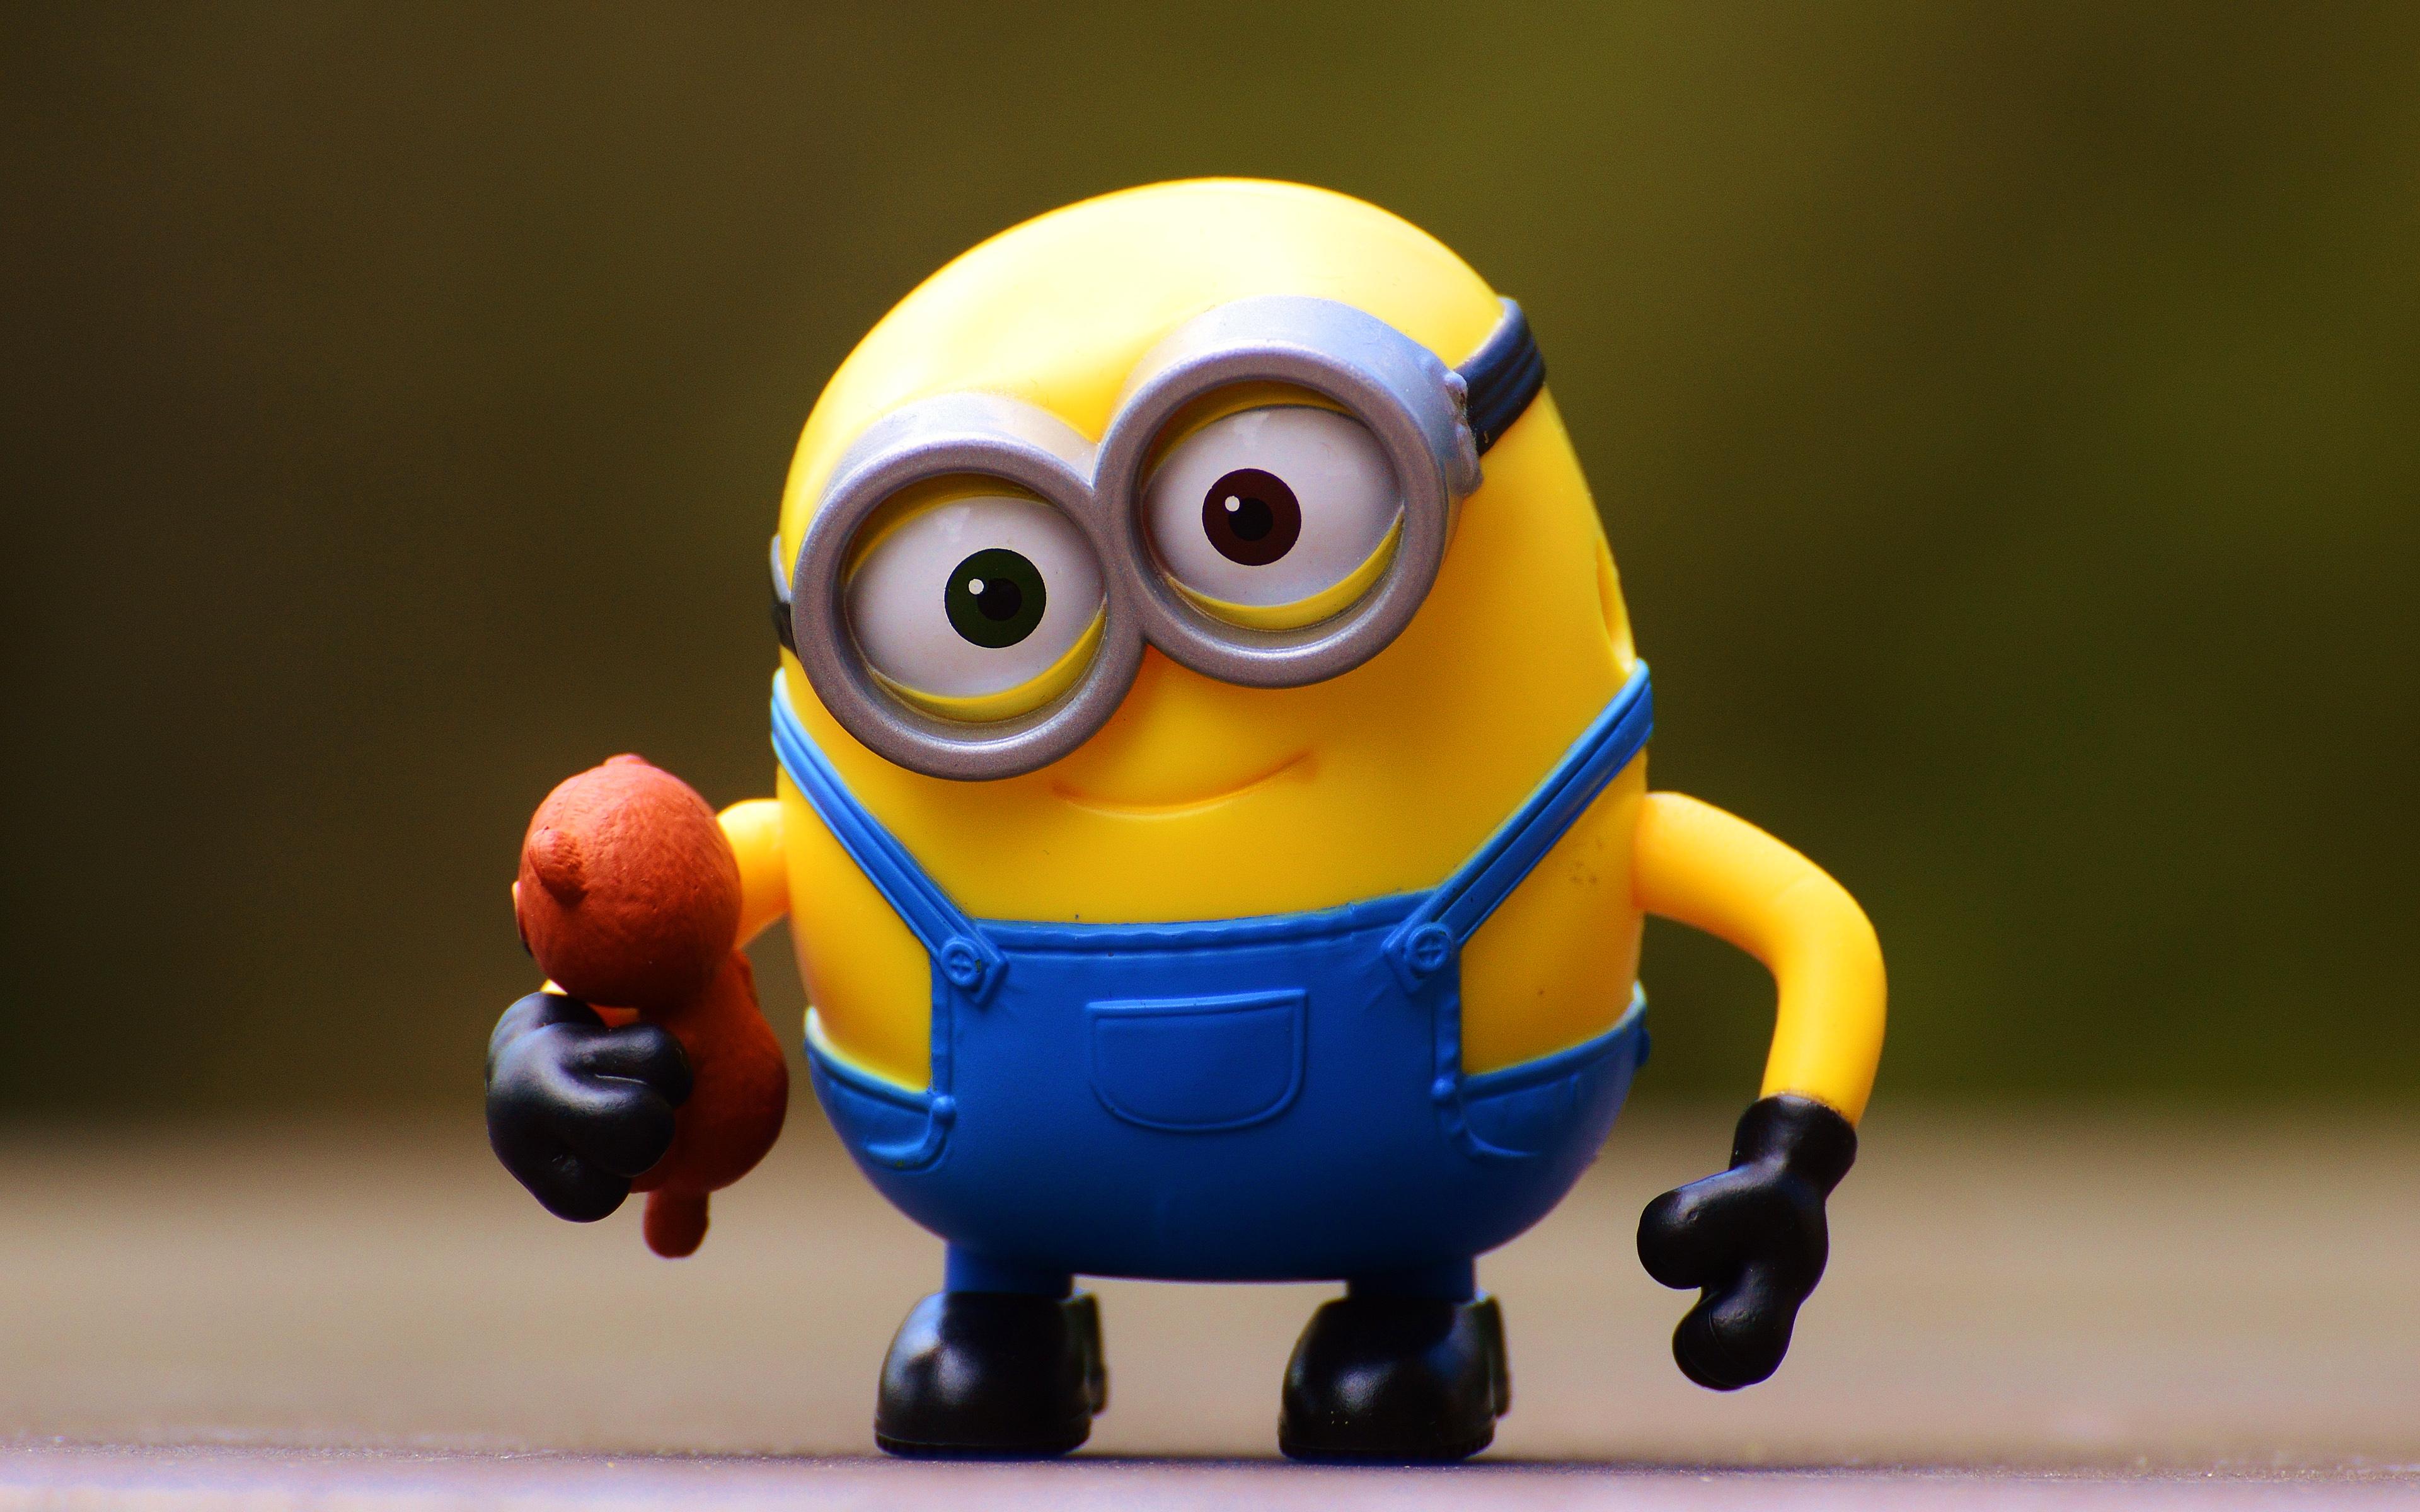 minions wallpaper,toy,action figure,yellow,facial expression,cartoon